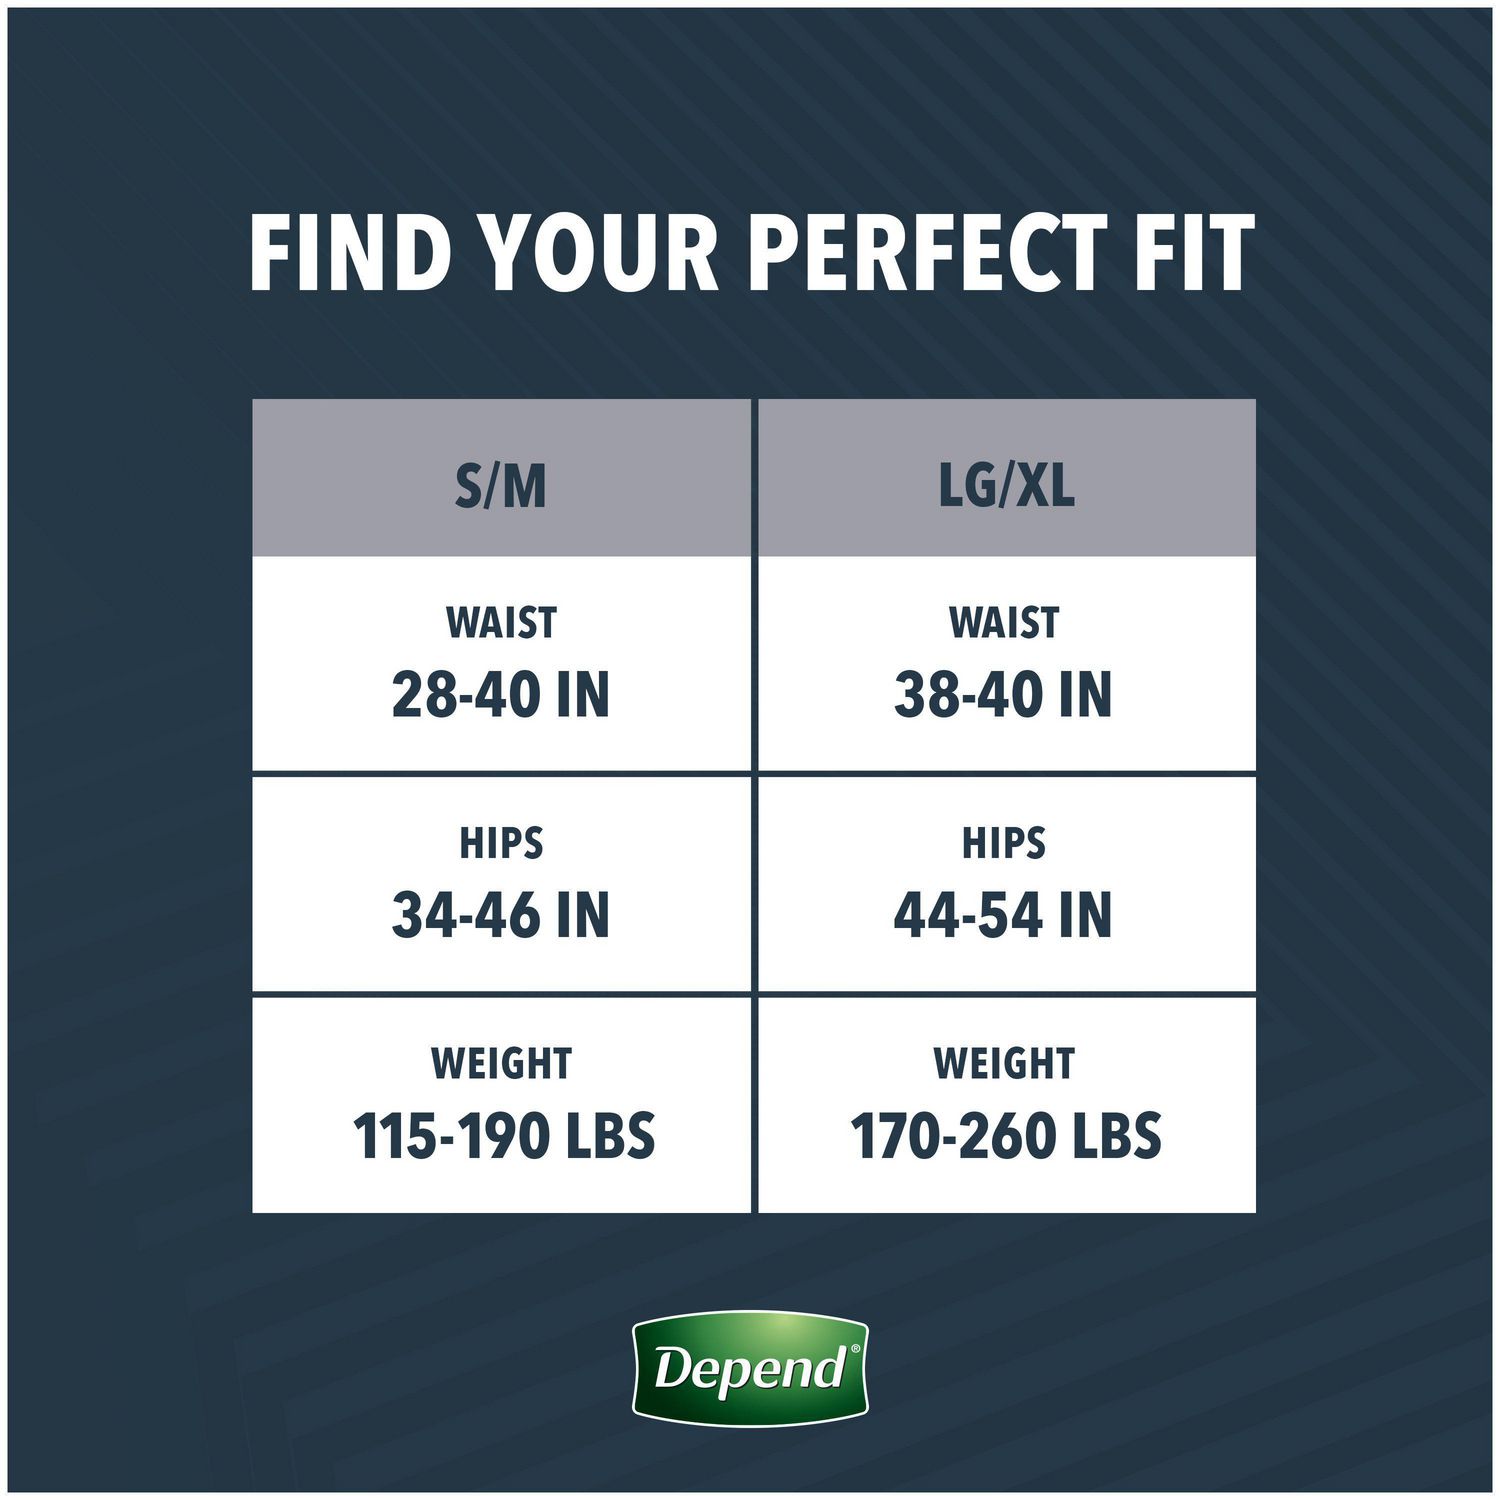 Personally, I fluctuate between sizes 12-16 and M-1x. Depends on